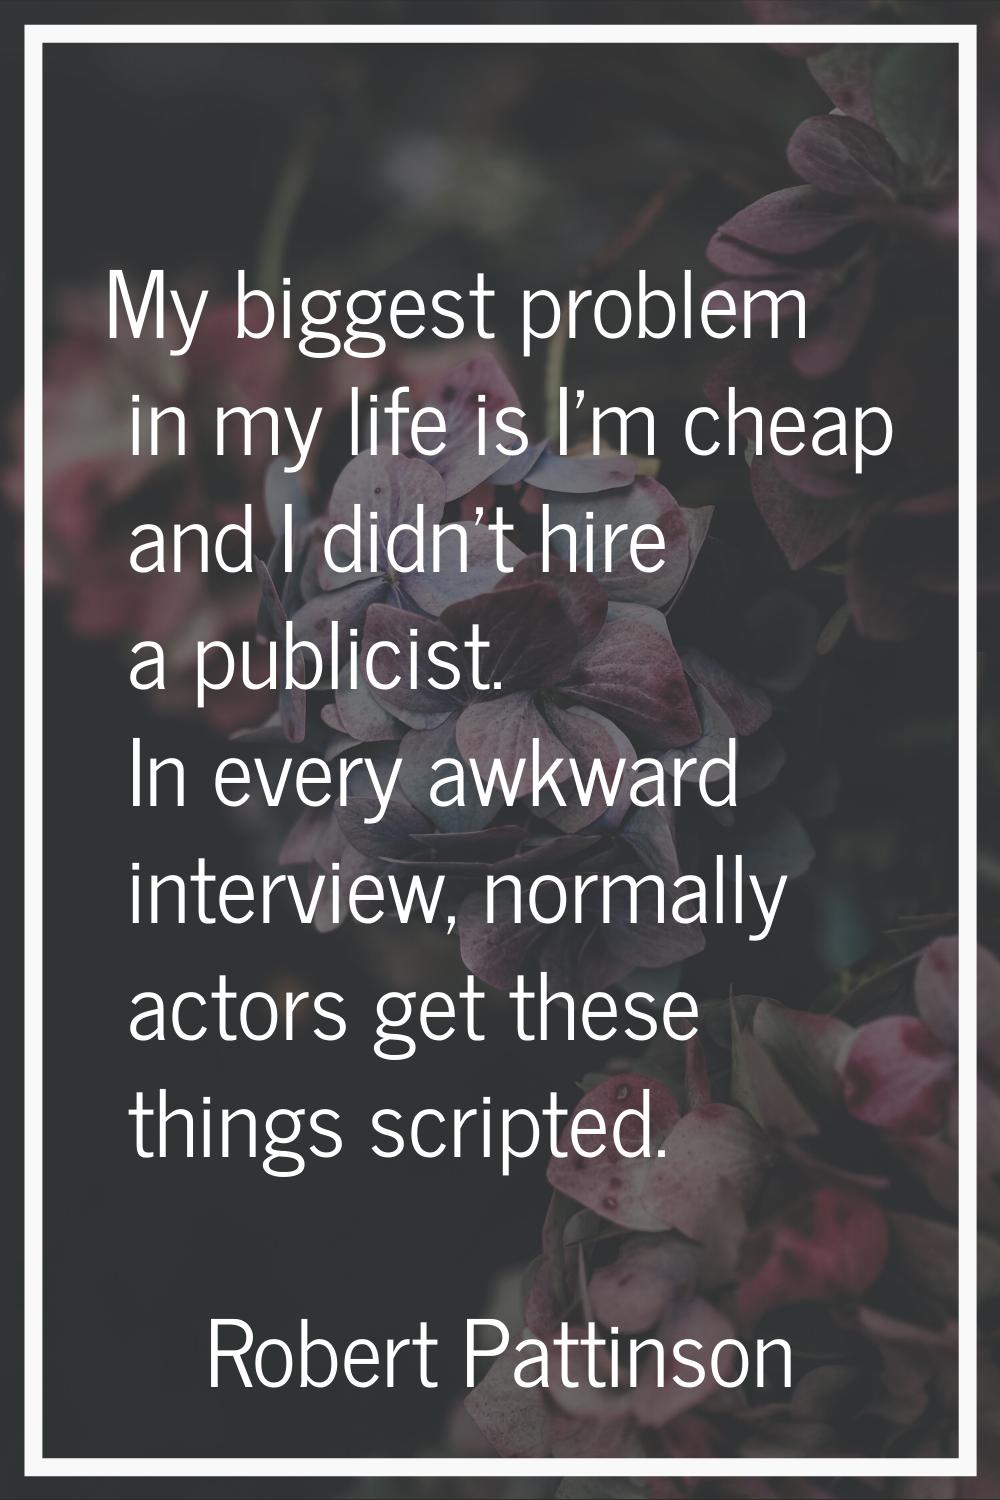 My biggest problem in my life is I'm cheap and I didn't hire a publicist. In every awkward intervie